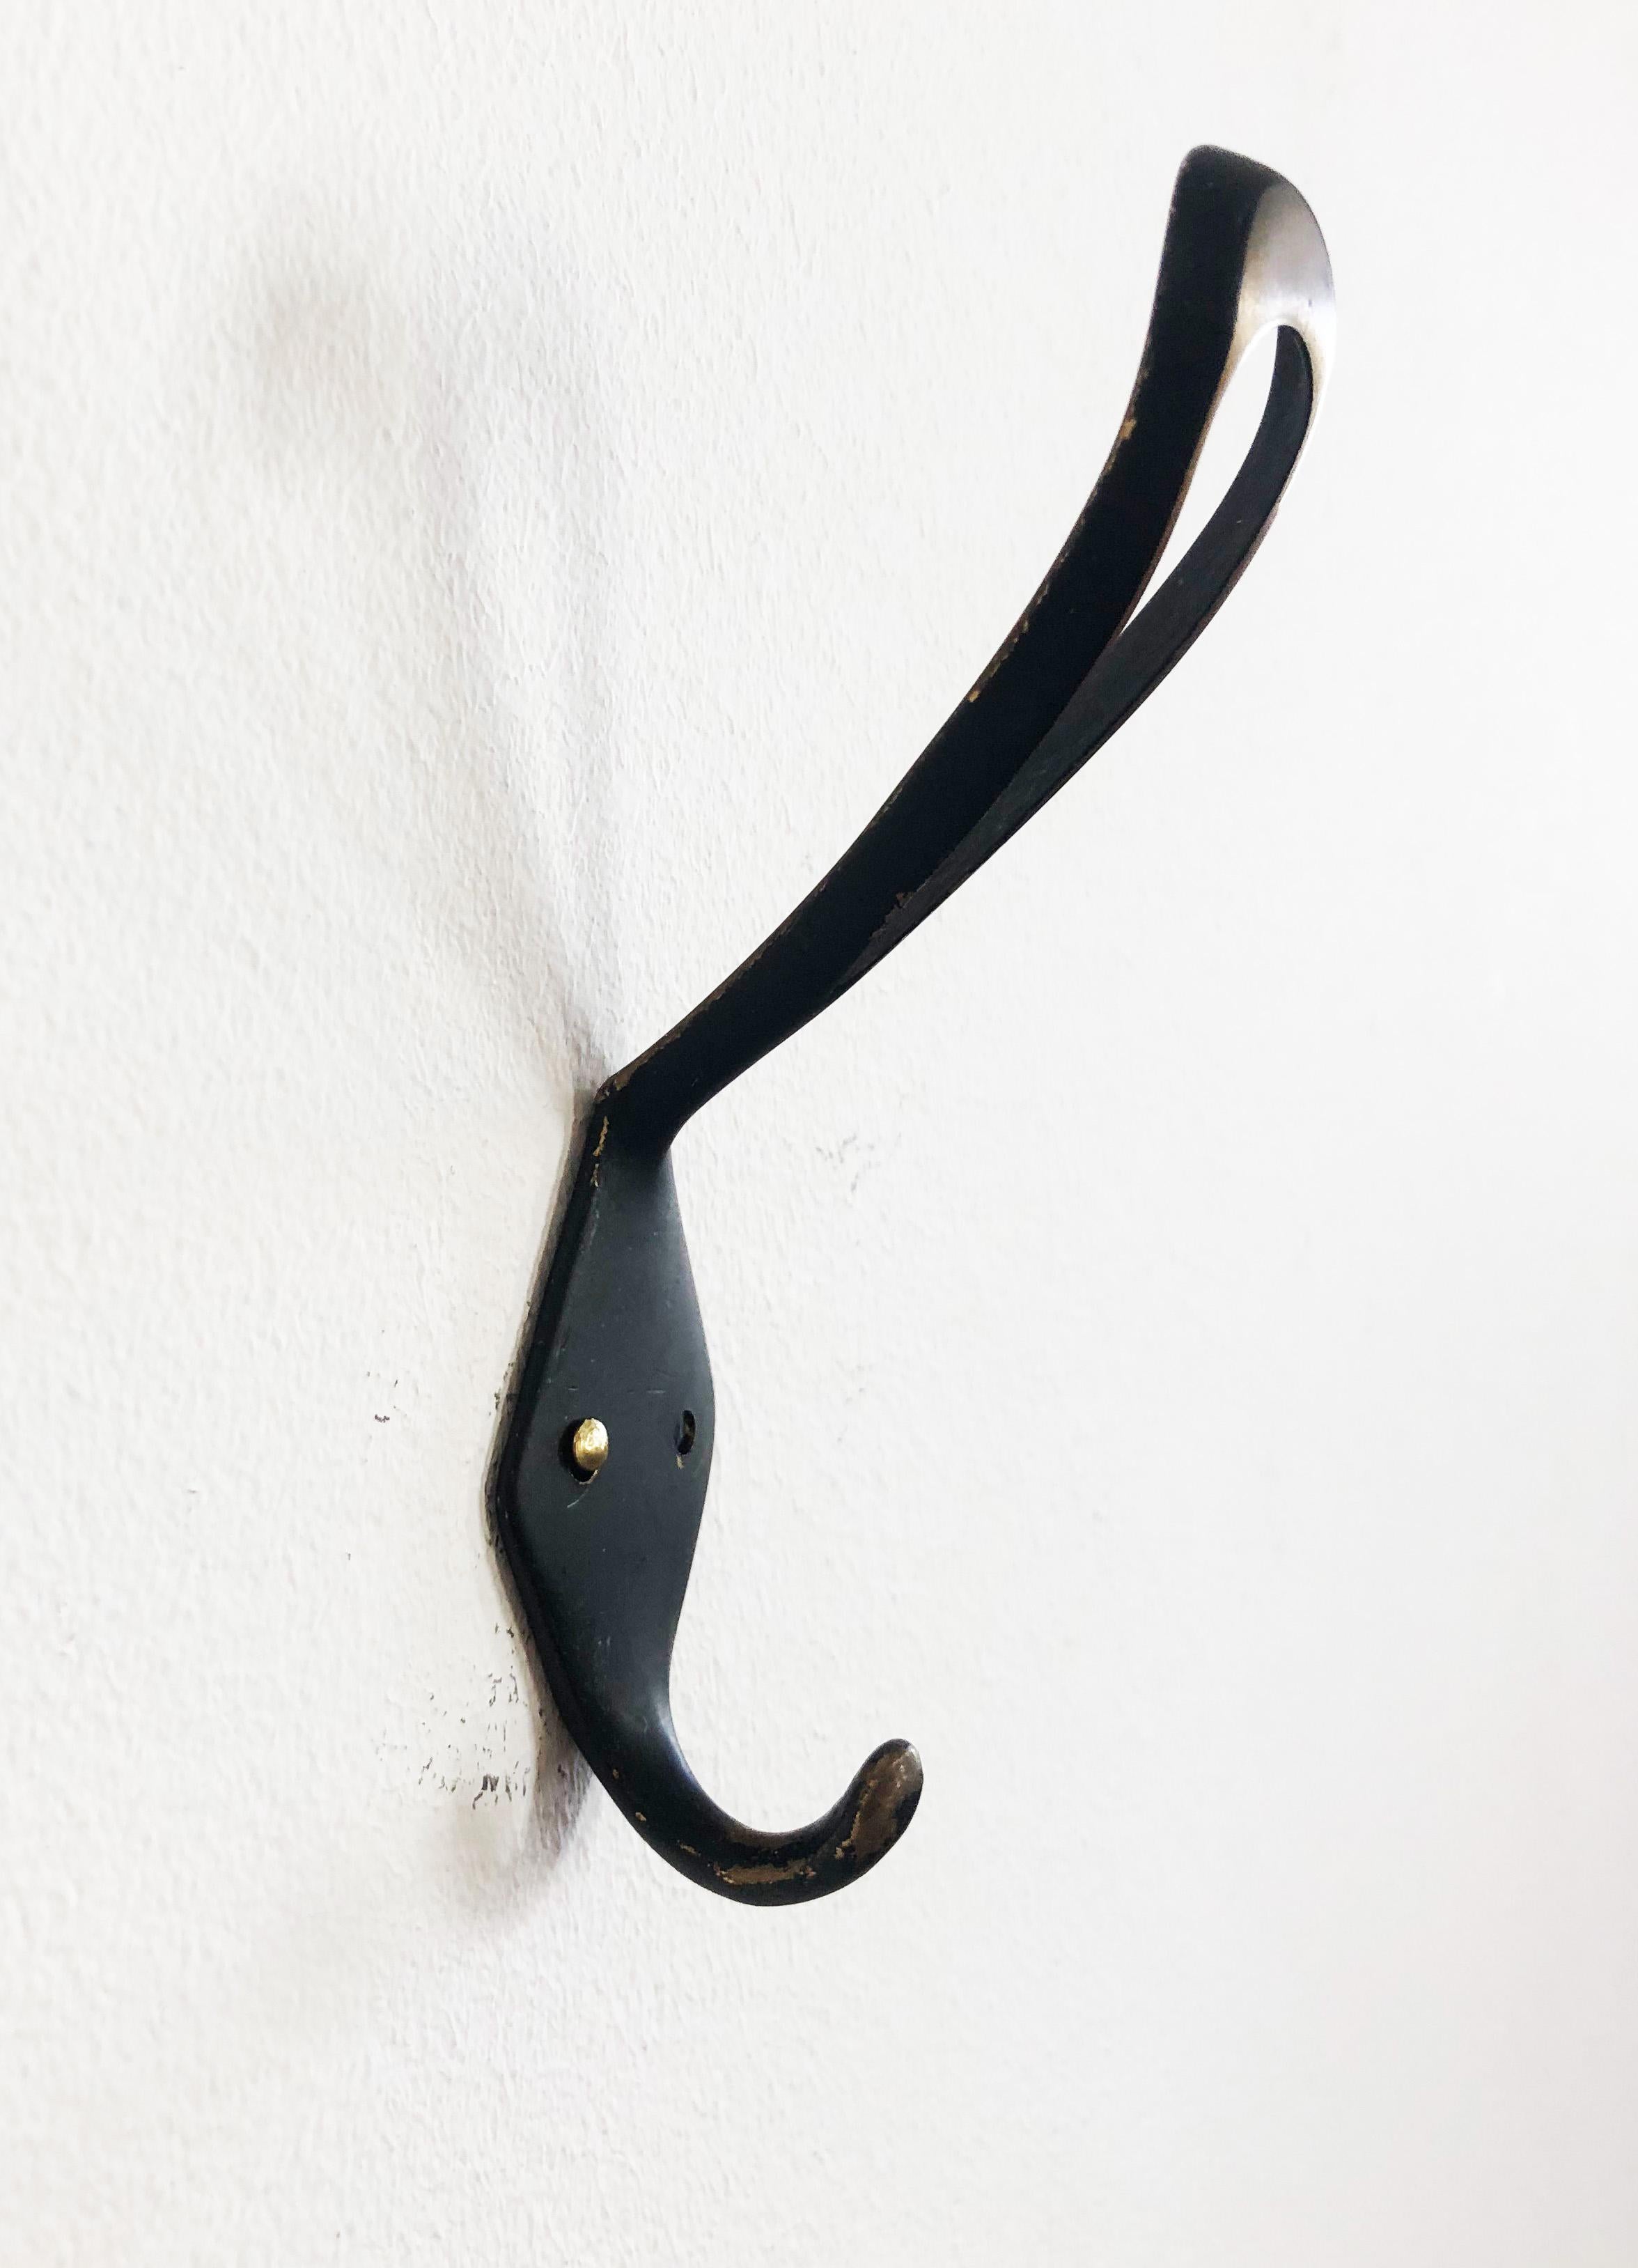 Ebonized brass coat, hat hooks, elegant shape and perfect quality made in Austria in the 1950s.
Up to four piece available.